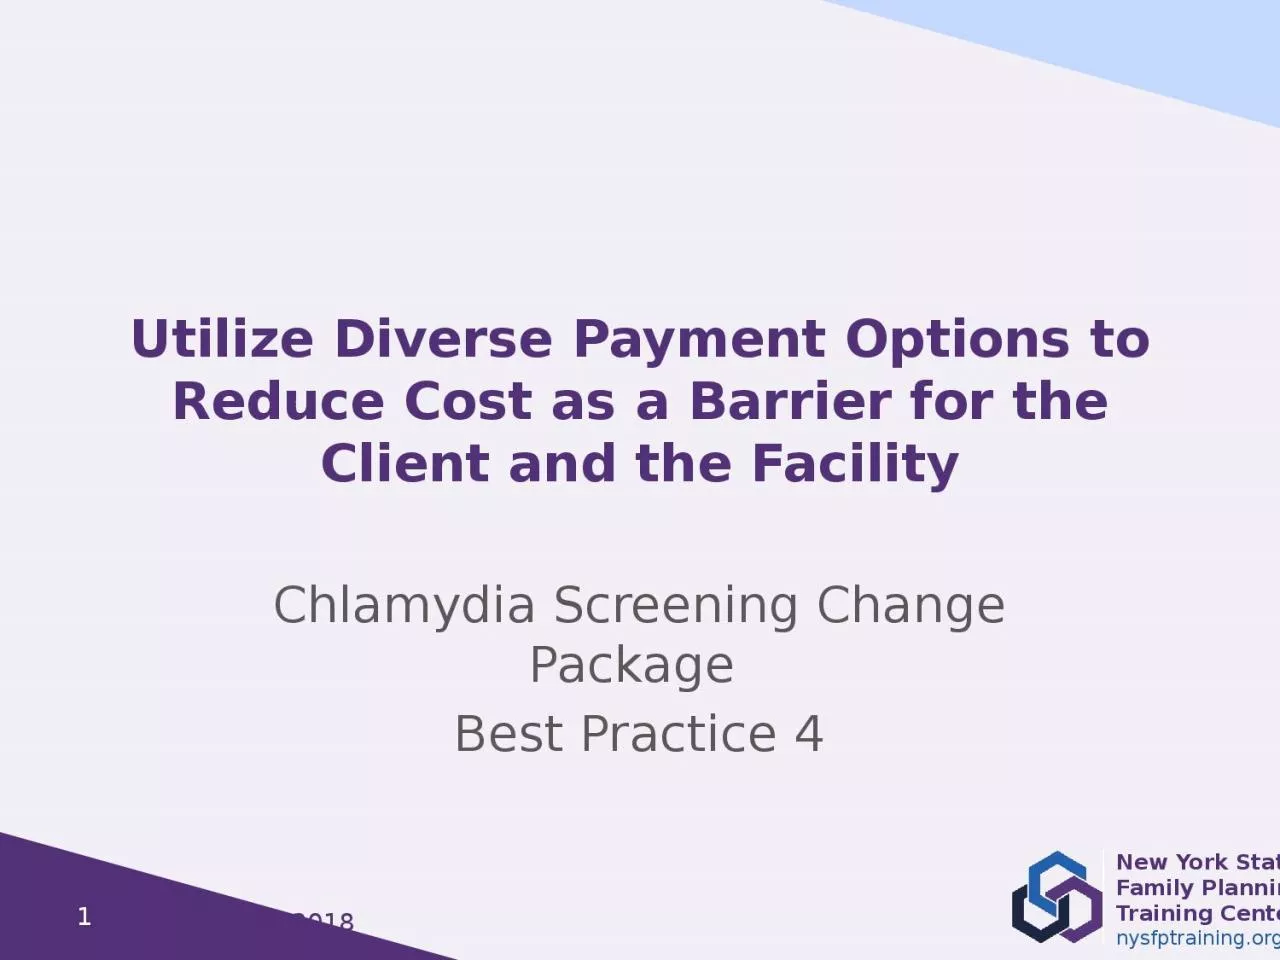 Utilize Diverse Payment Options to Reduce Cost as a Barrier for the Client and the Facility